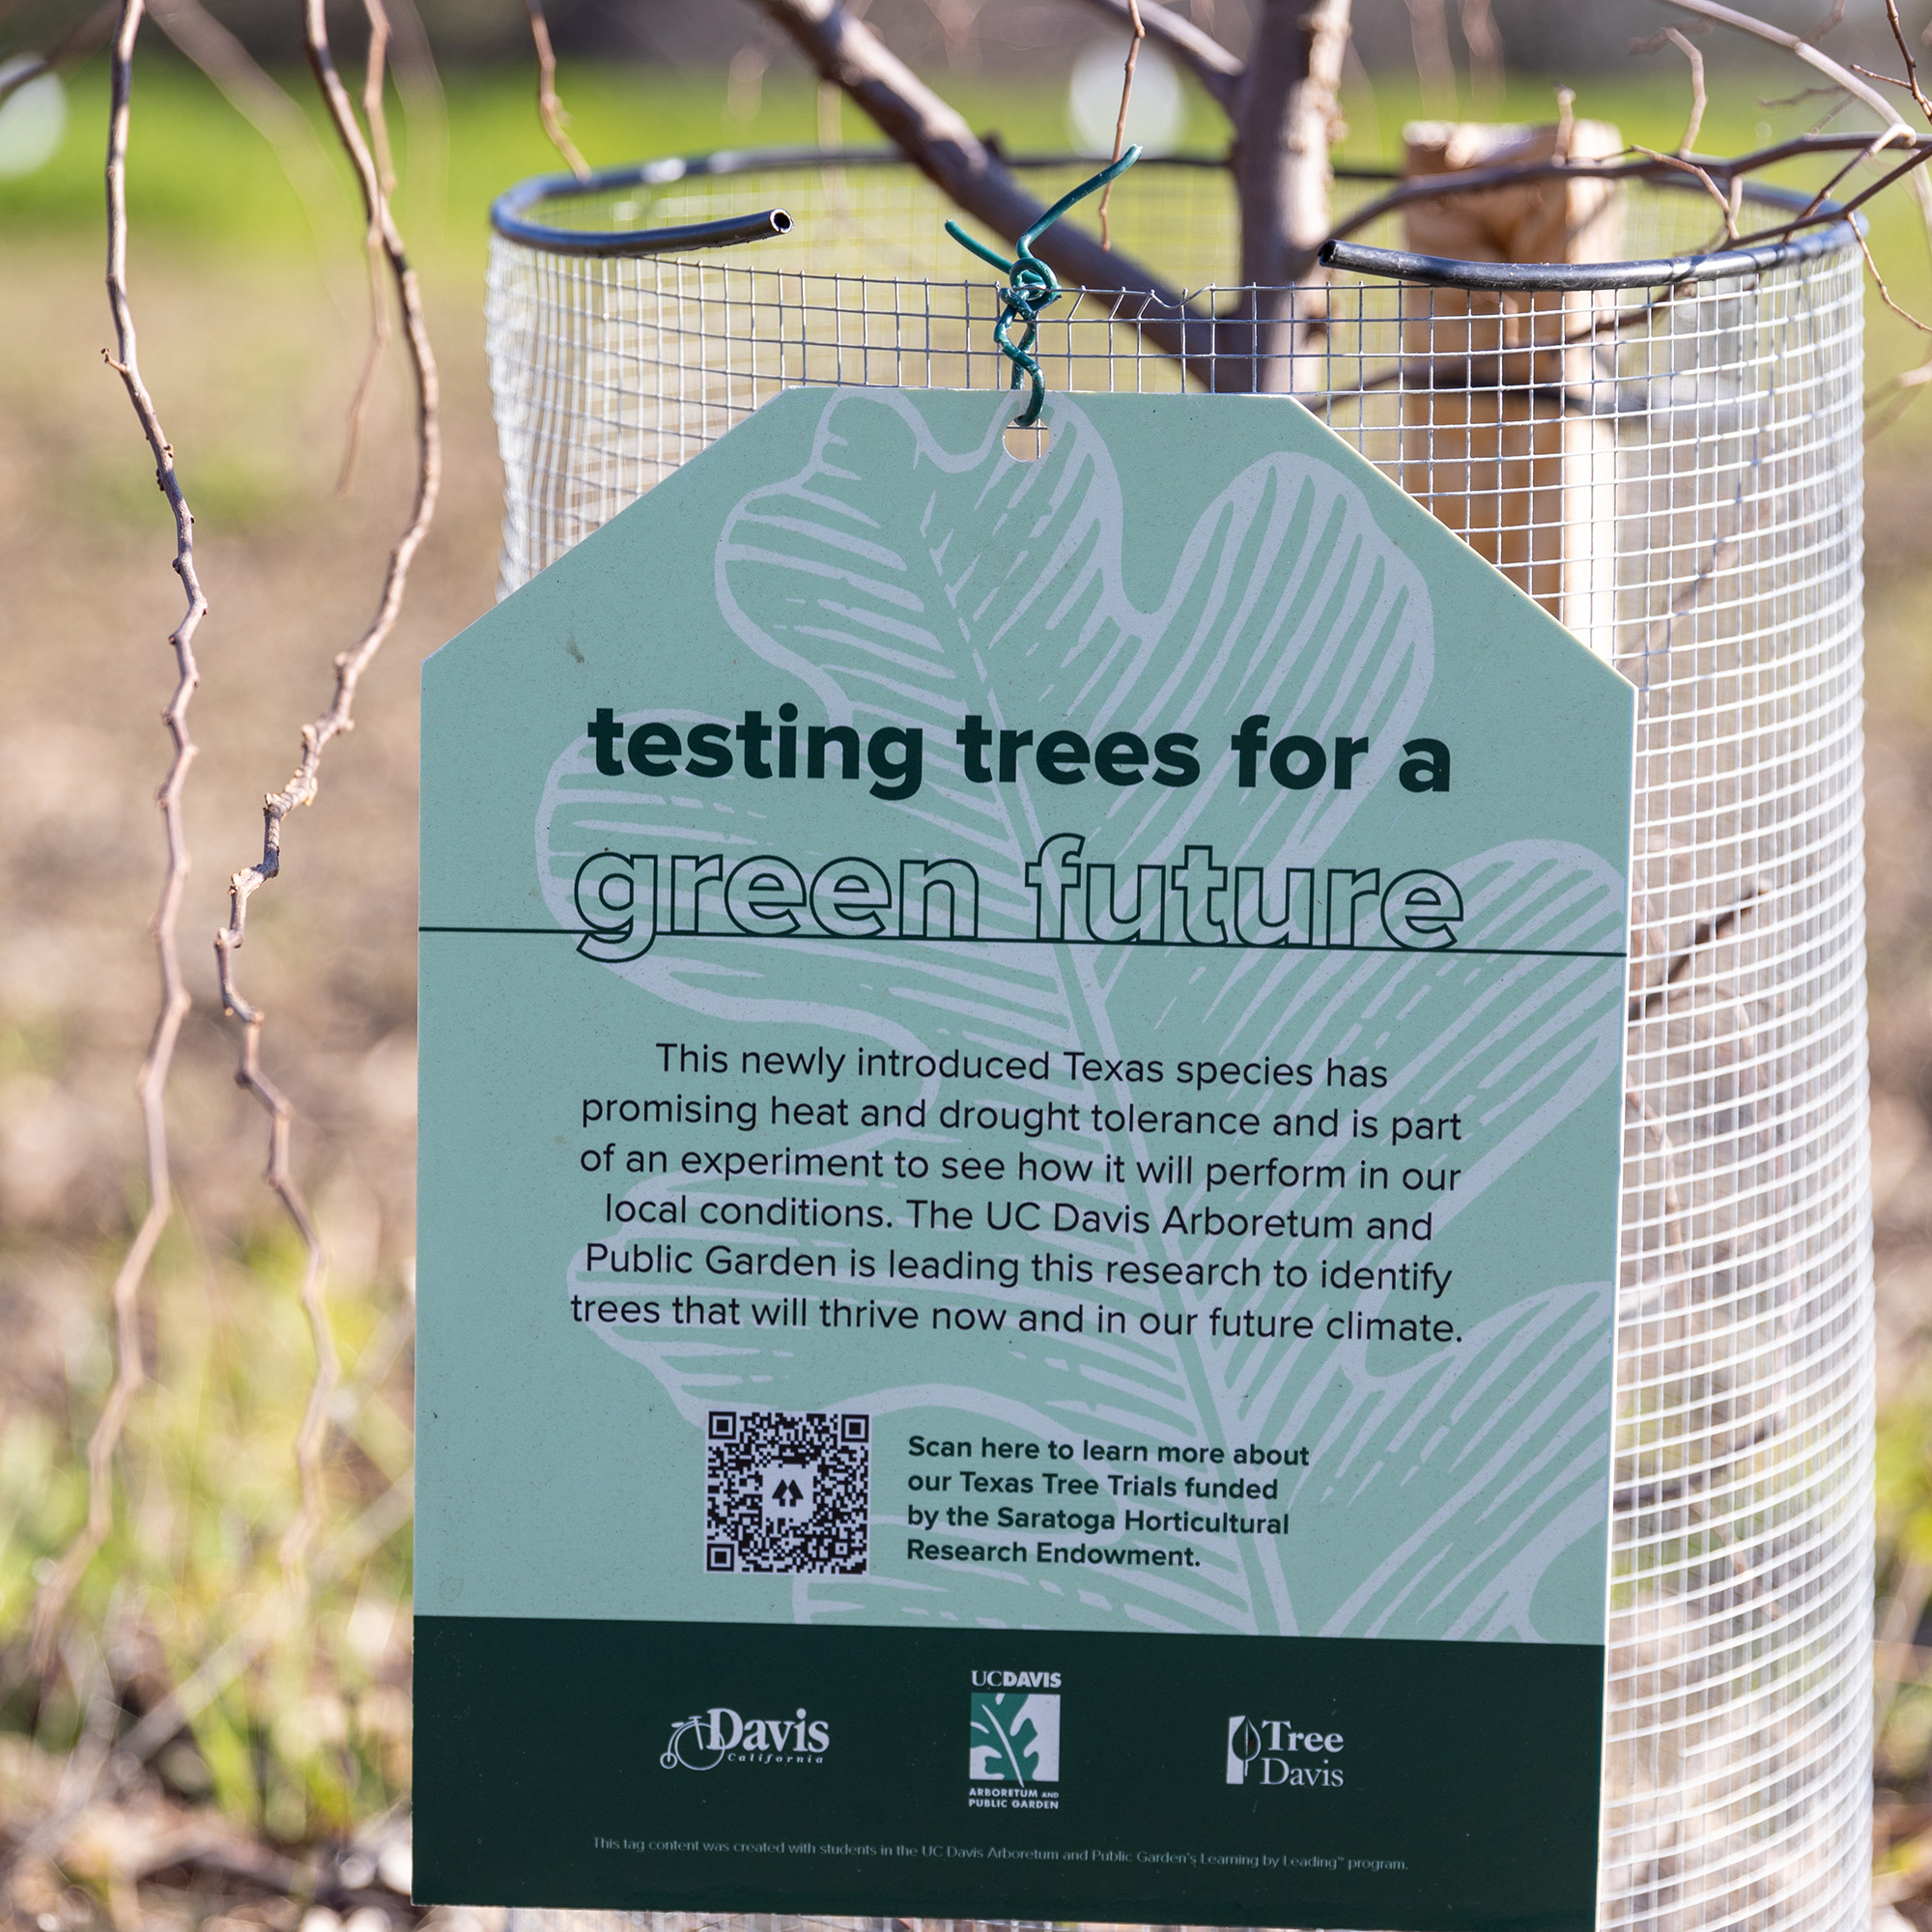 Some of the newly planted trees have informational signs that explain the experiement.